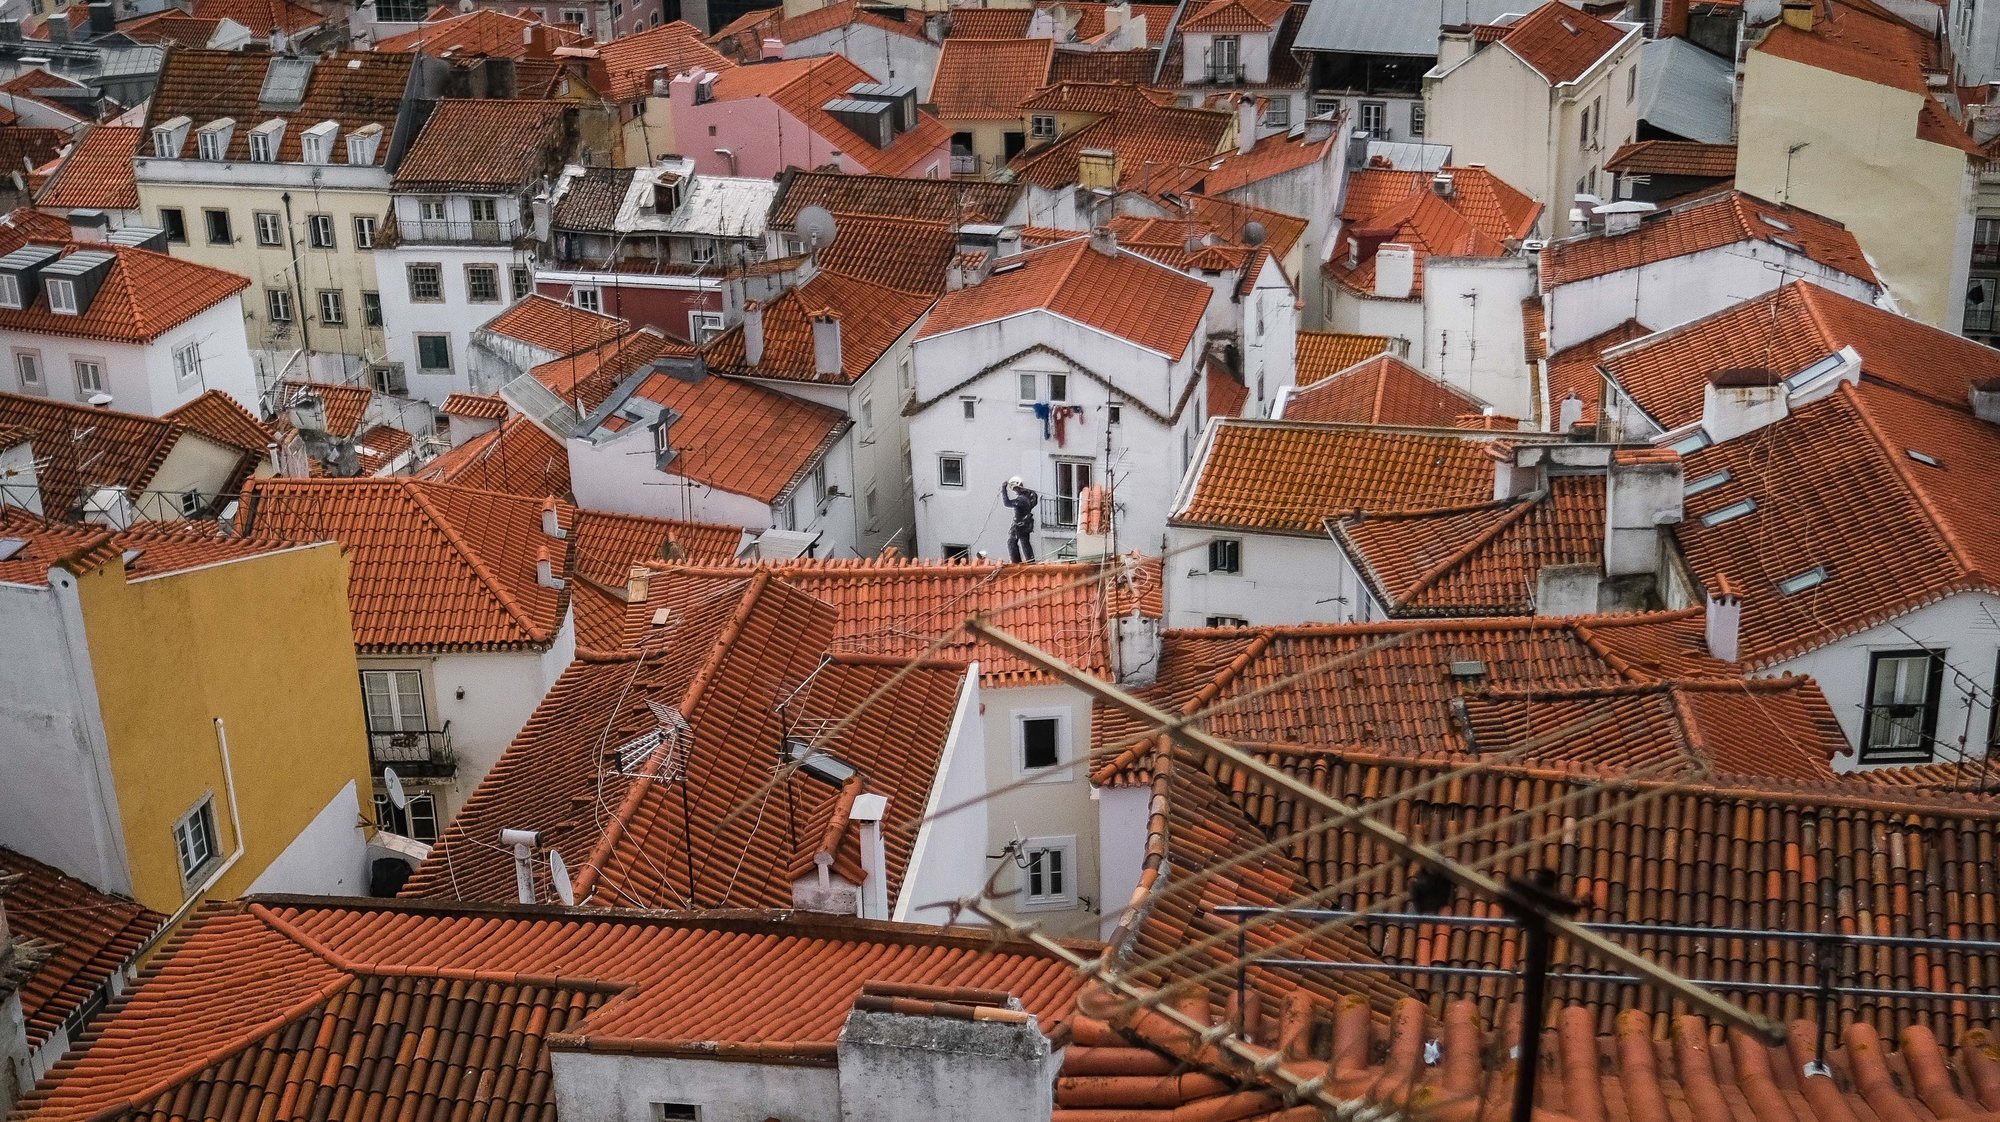 epa09282366 A man works on a roof at Bairro de Alfama in Lisbon, Portugal, 18 June 2021. TheÂ Portuguese cabinetÂ announced on 17 June the ban on circulation to and from the Lisbon Metropolitan Area (AML) on weekends, starting at 15:00 on 18 June, due to the rise in cases ofÂ Covid-19 in this territory.  EPA/MARIO CRUZ